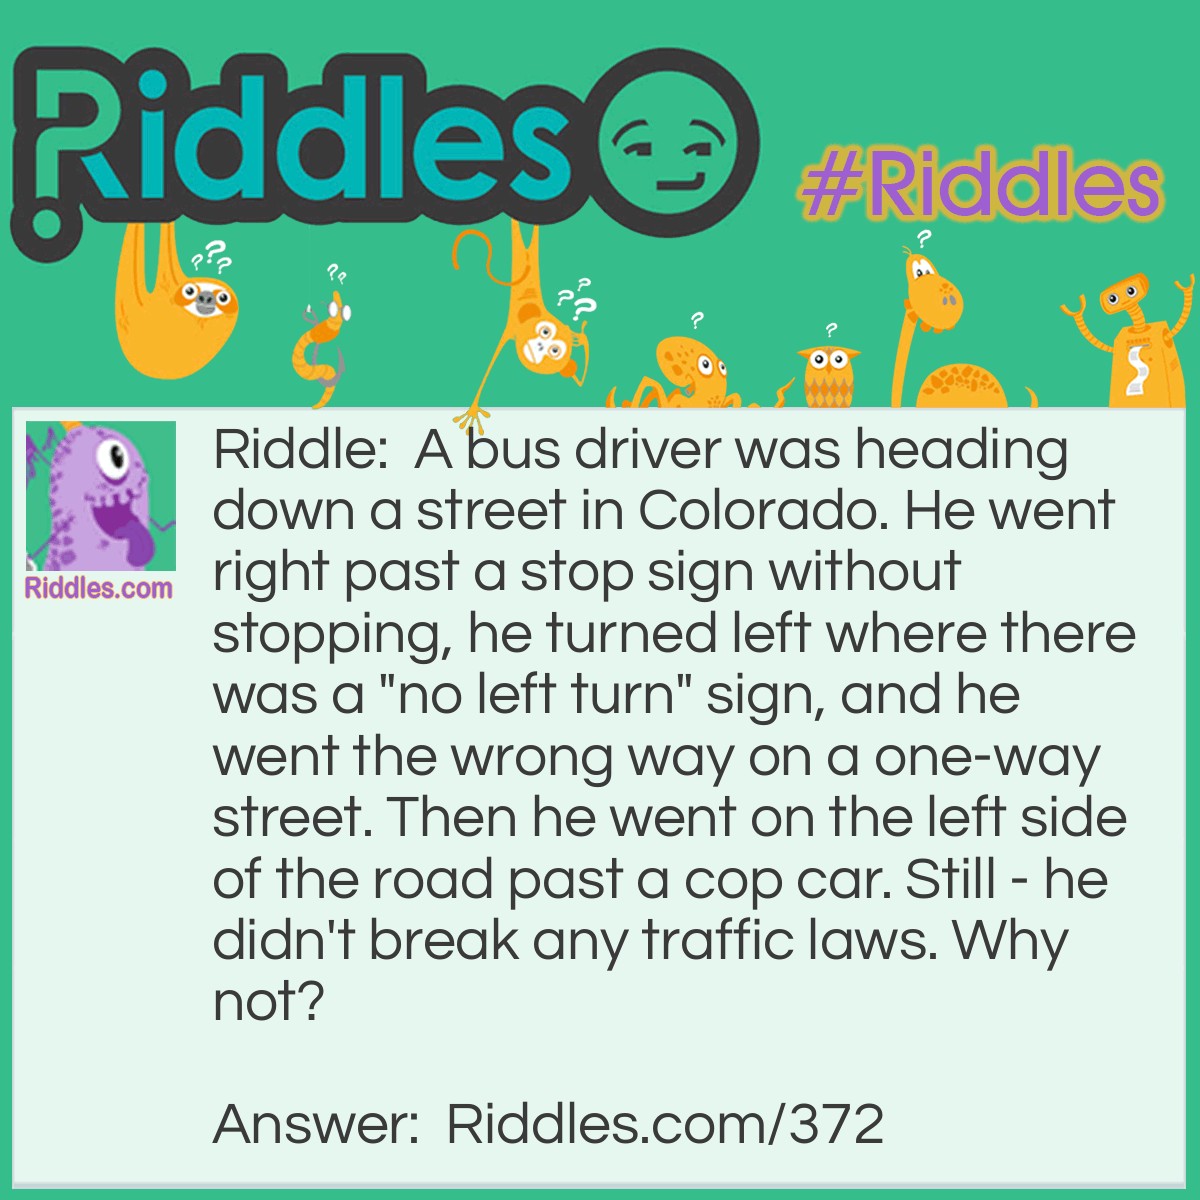 Riddle: A bus driver was heading down a street in Colorado. He went right past a stop sign without stopping, he turned left where there was a "no left turn" sign, and he went the wrong way on a one-way street. Then he went on the left side of the road past a cop car. Still - he didn't break any traffic laws. Why not? Answer: He was walking.